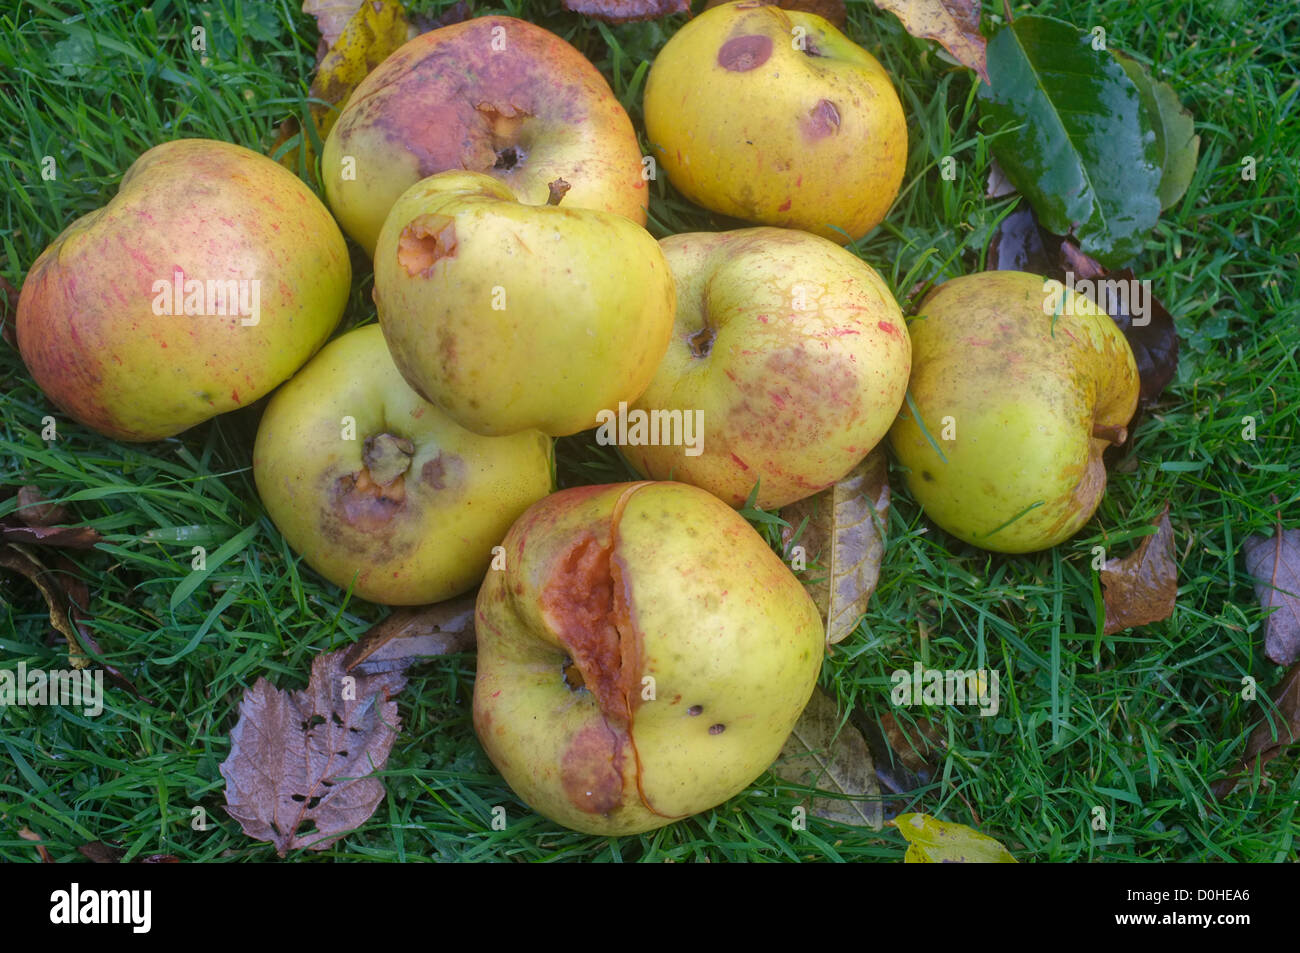 Windfall apples gathered together in the garden and showing some damage Stock Photo